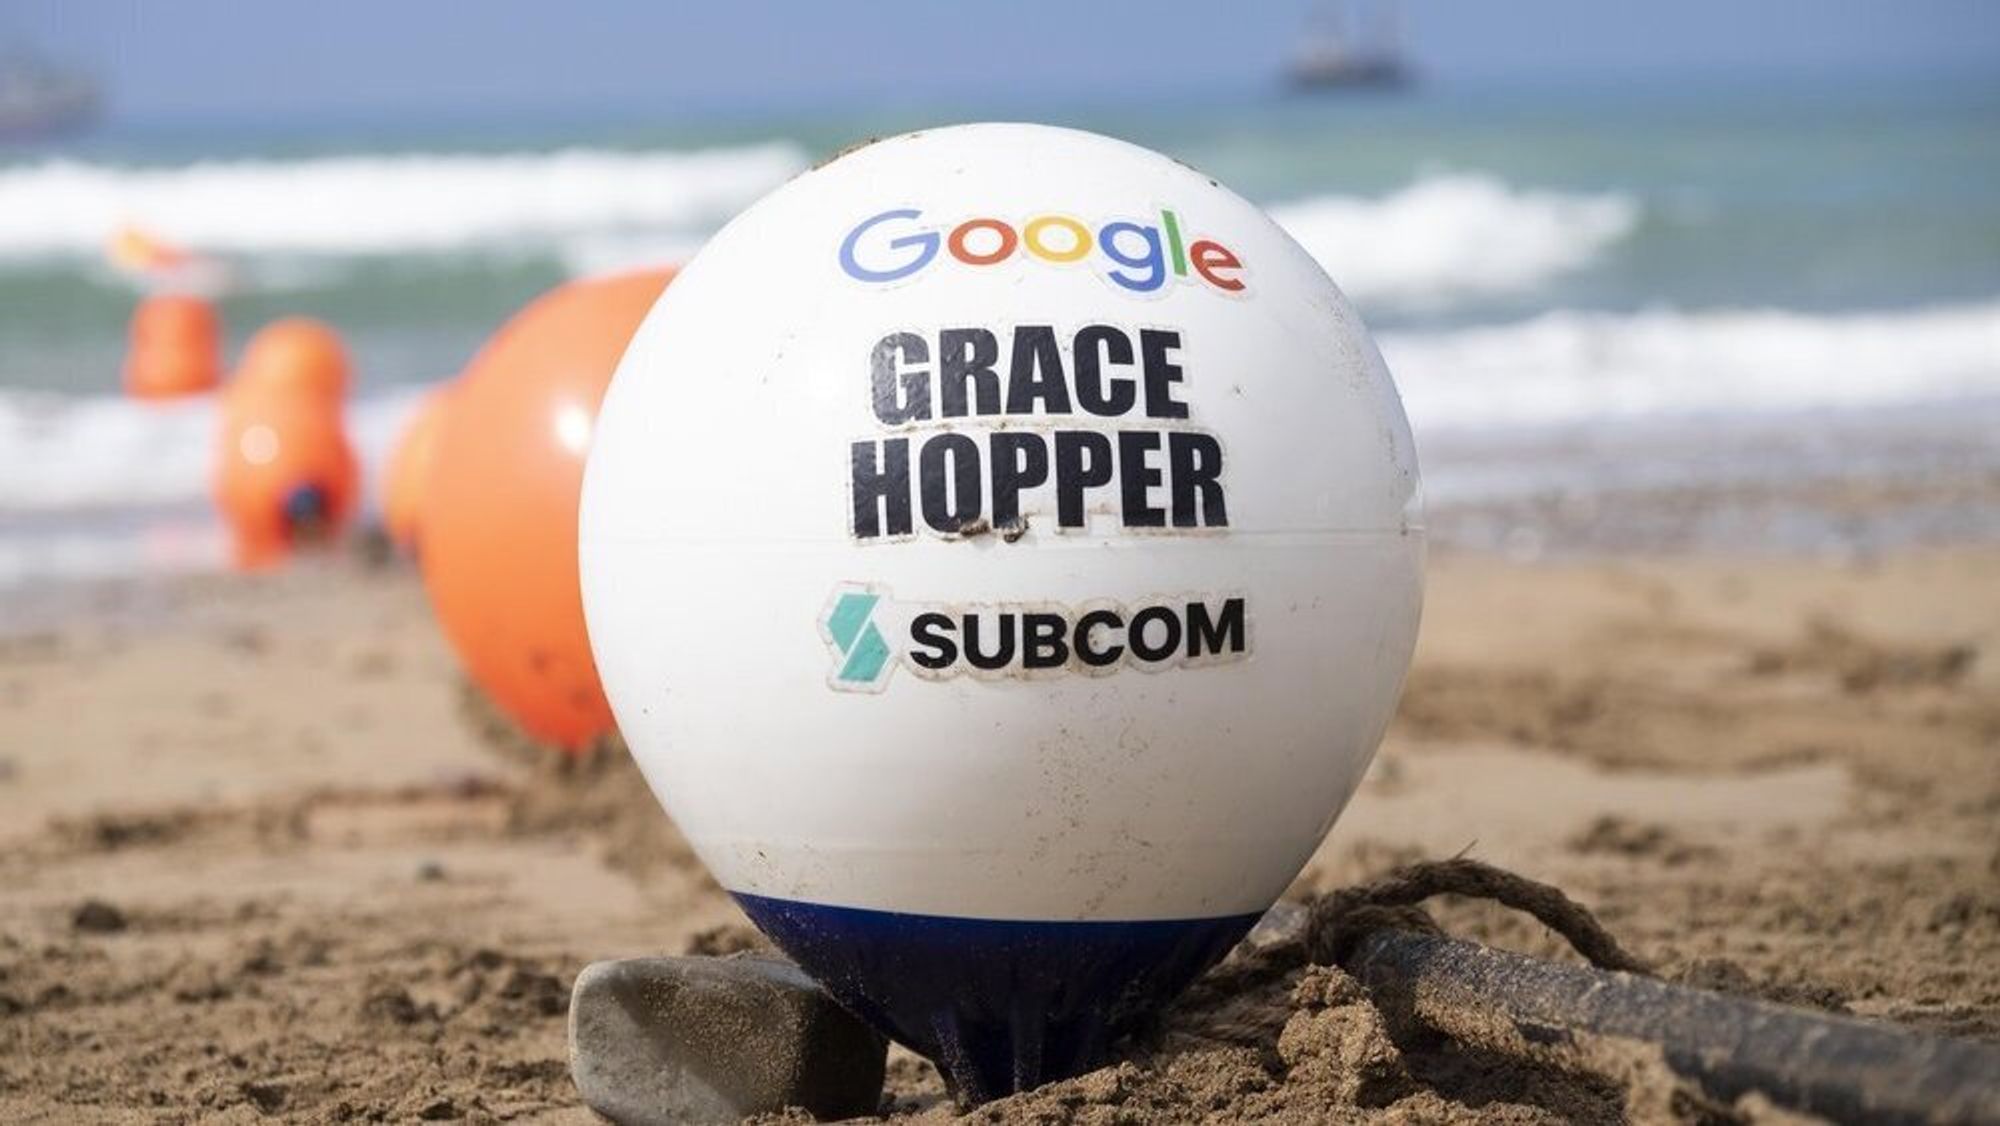 Google’s heaviest underwater cable has reached the UK